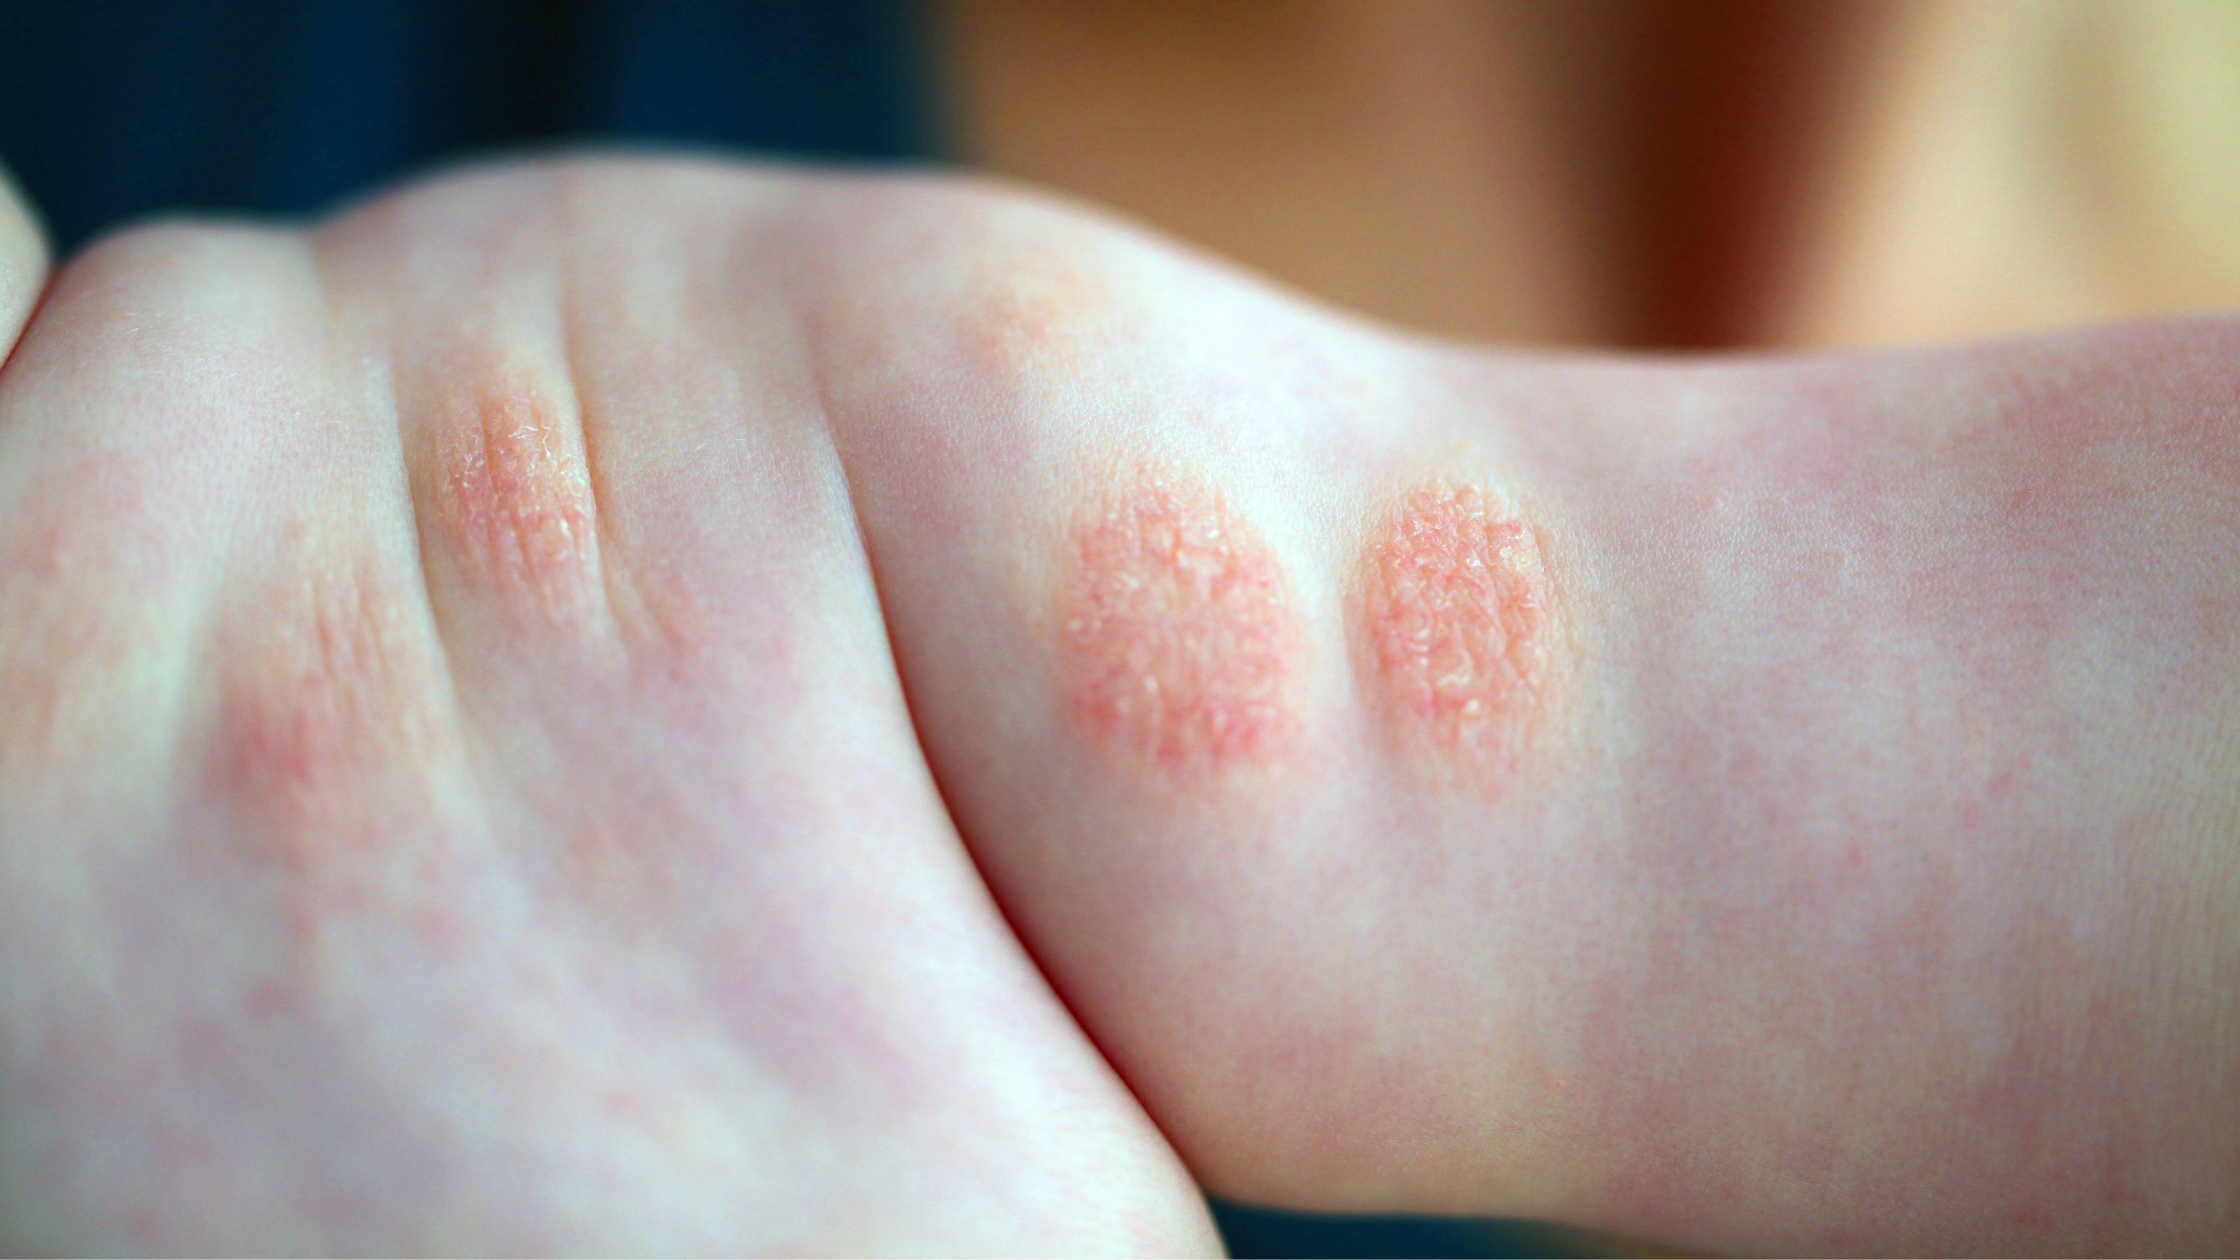 Will My Child Grow Out of Their Eczema?